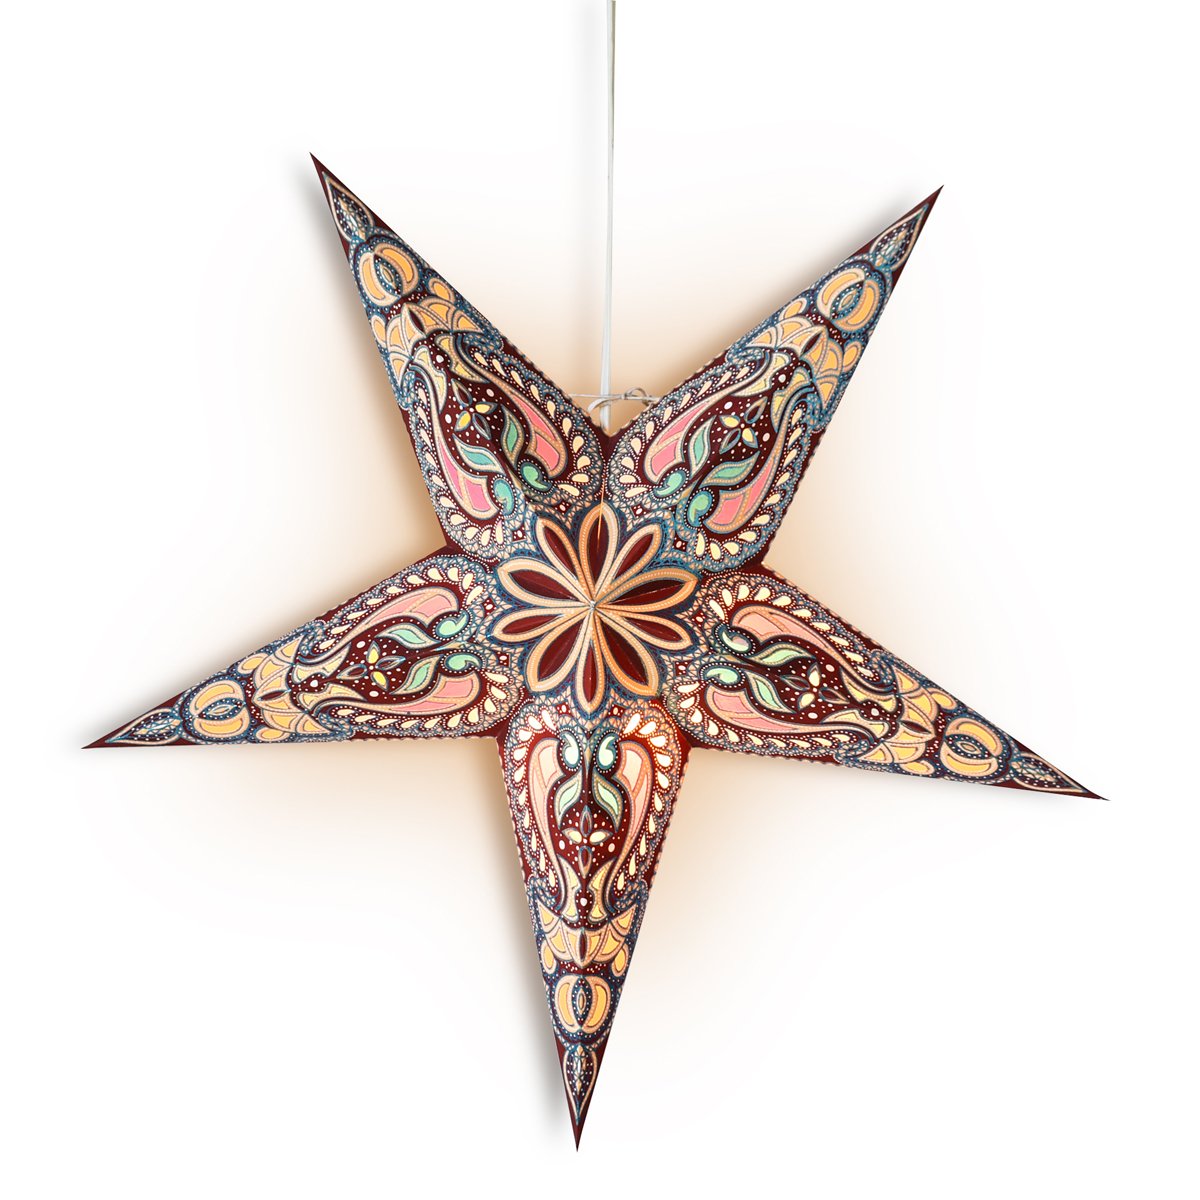 3-PACK + Cord | 24" Brown Alaska Glitter Paper Star Lantern and Lamp Cord Hanging Decoration - AsianImportStore.com - B2B Wholesale Lighting and Decor